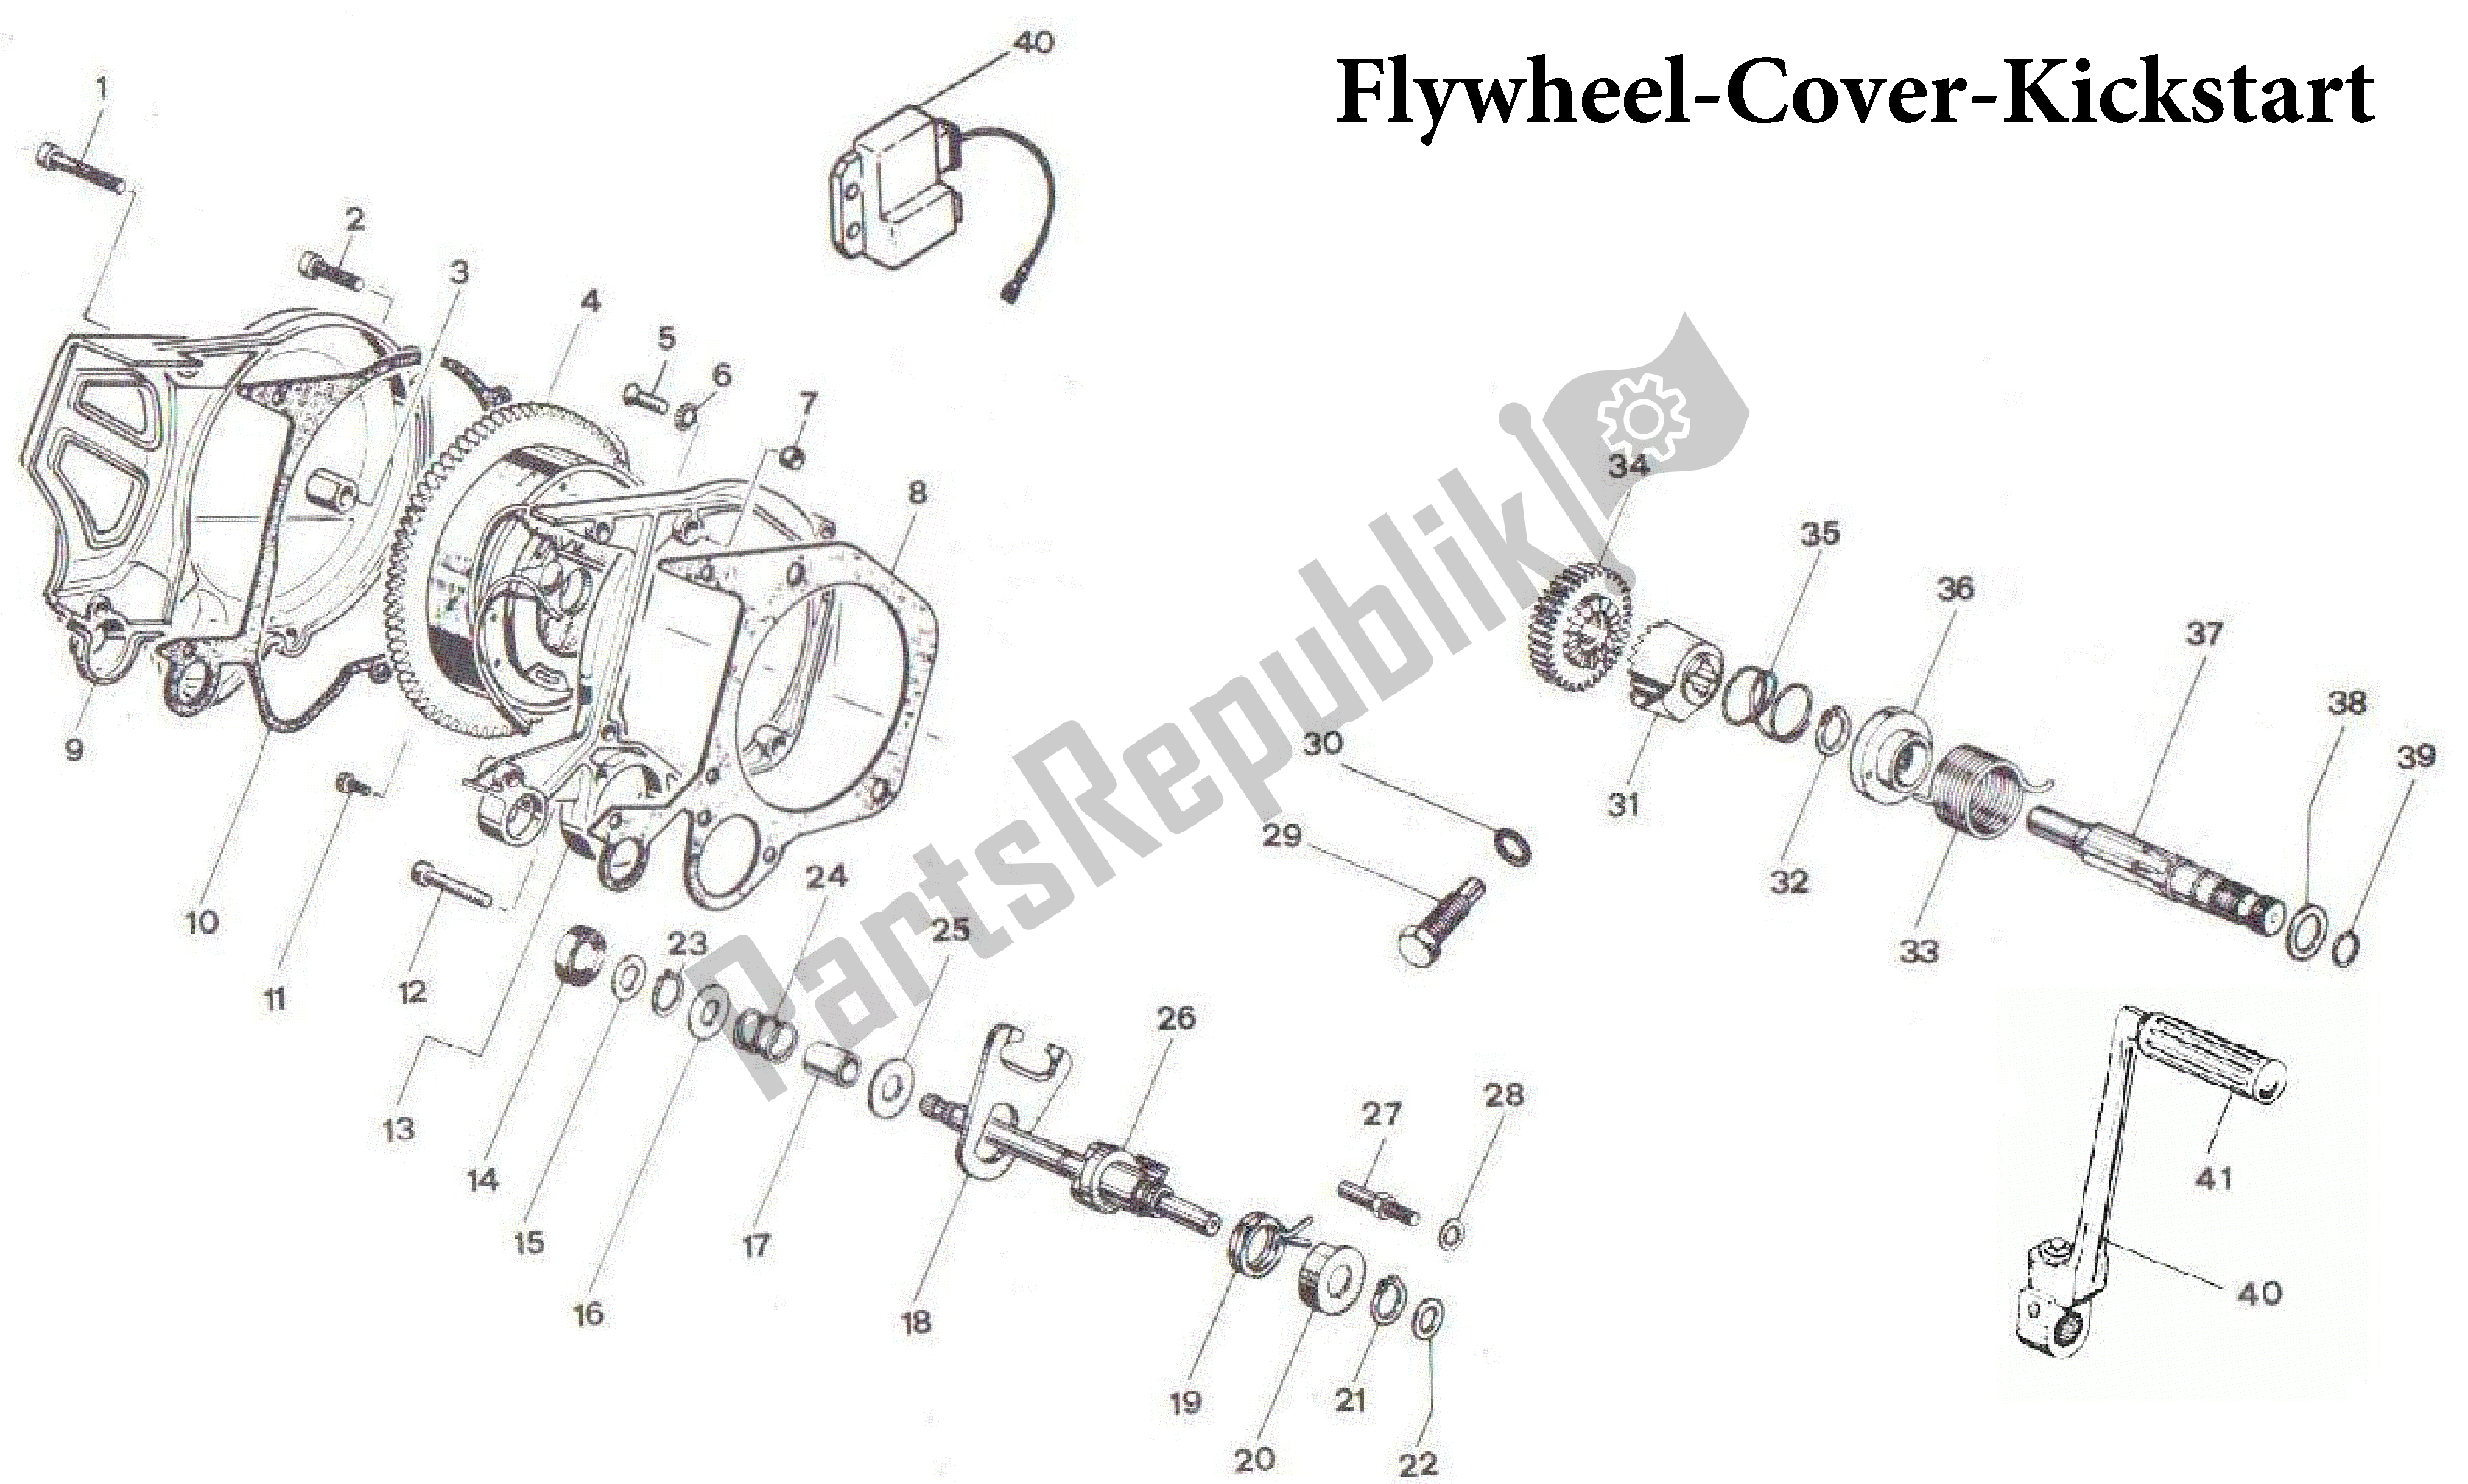 All parts for the Flywheel-cover-kickstart of the Aprilia Red Rose 50 1991